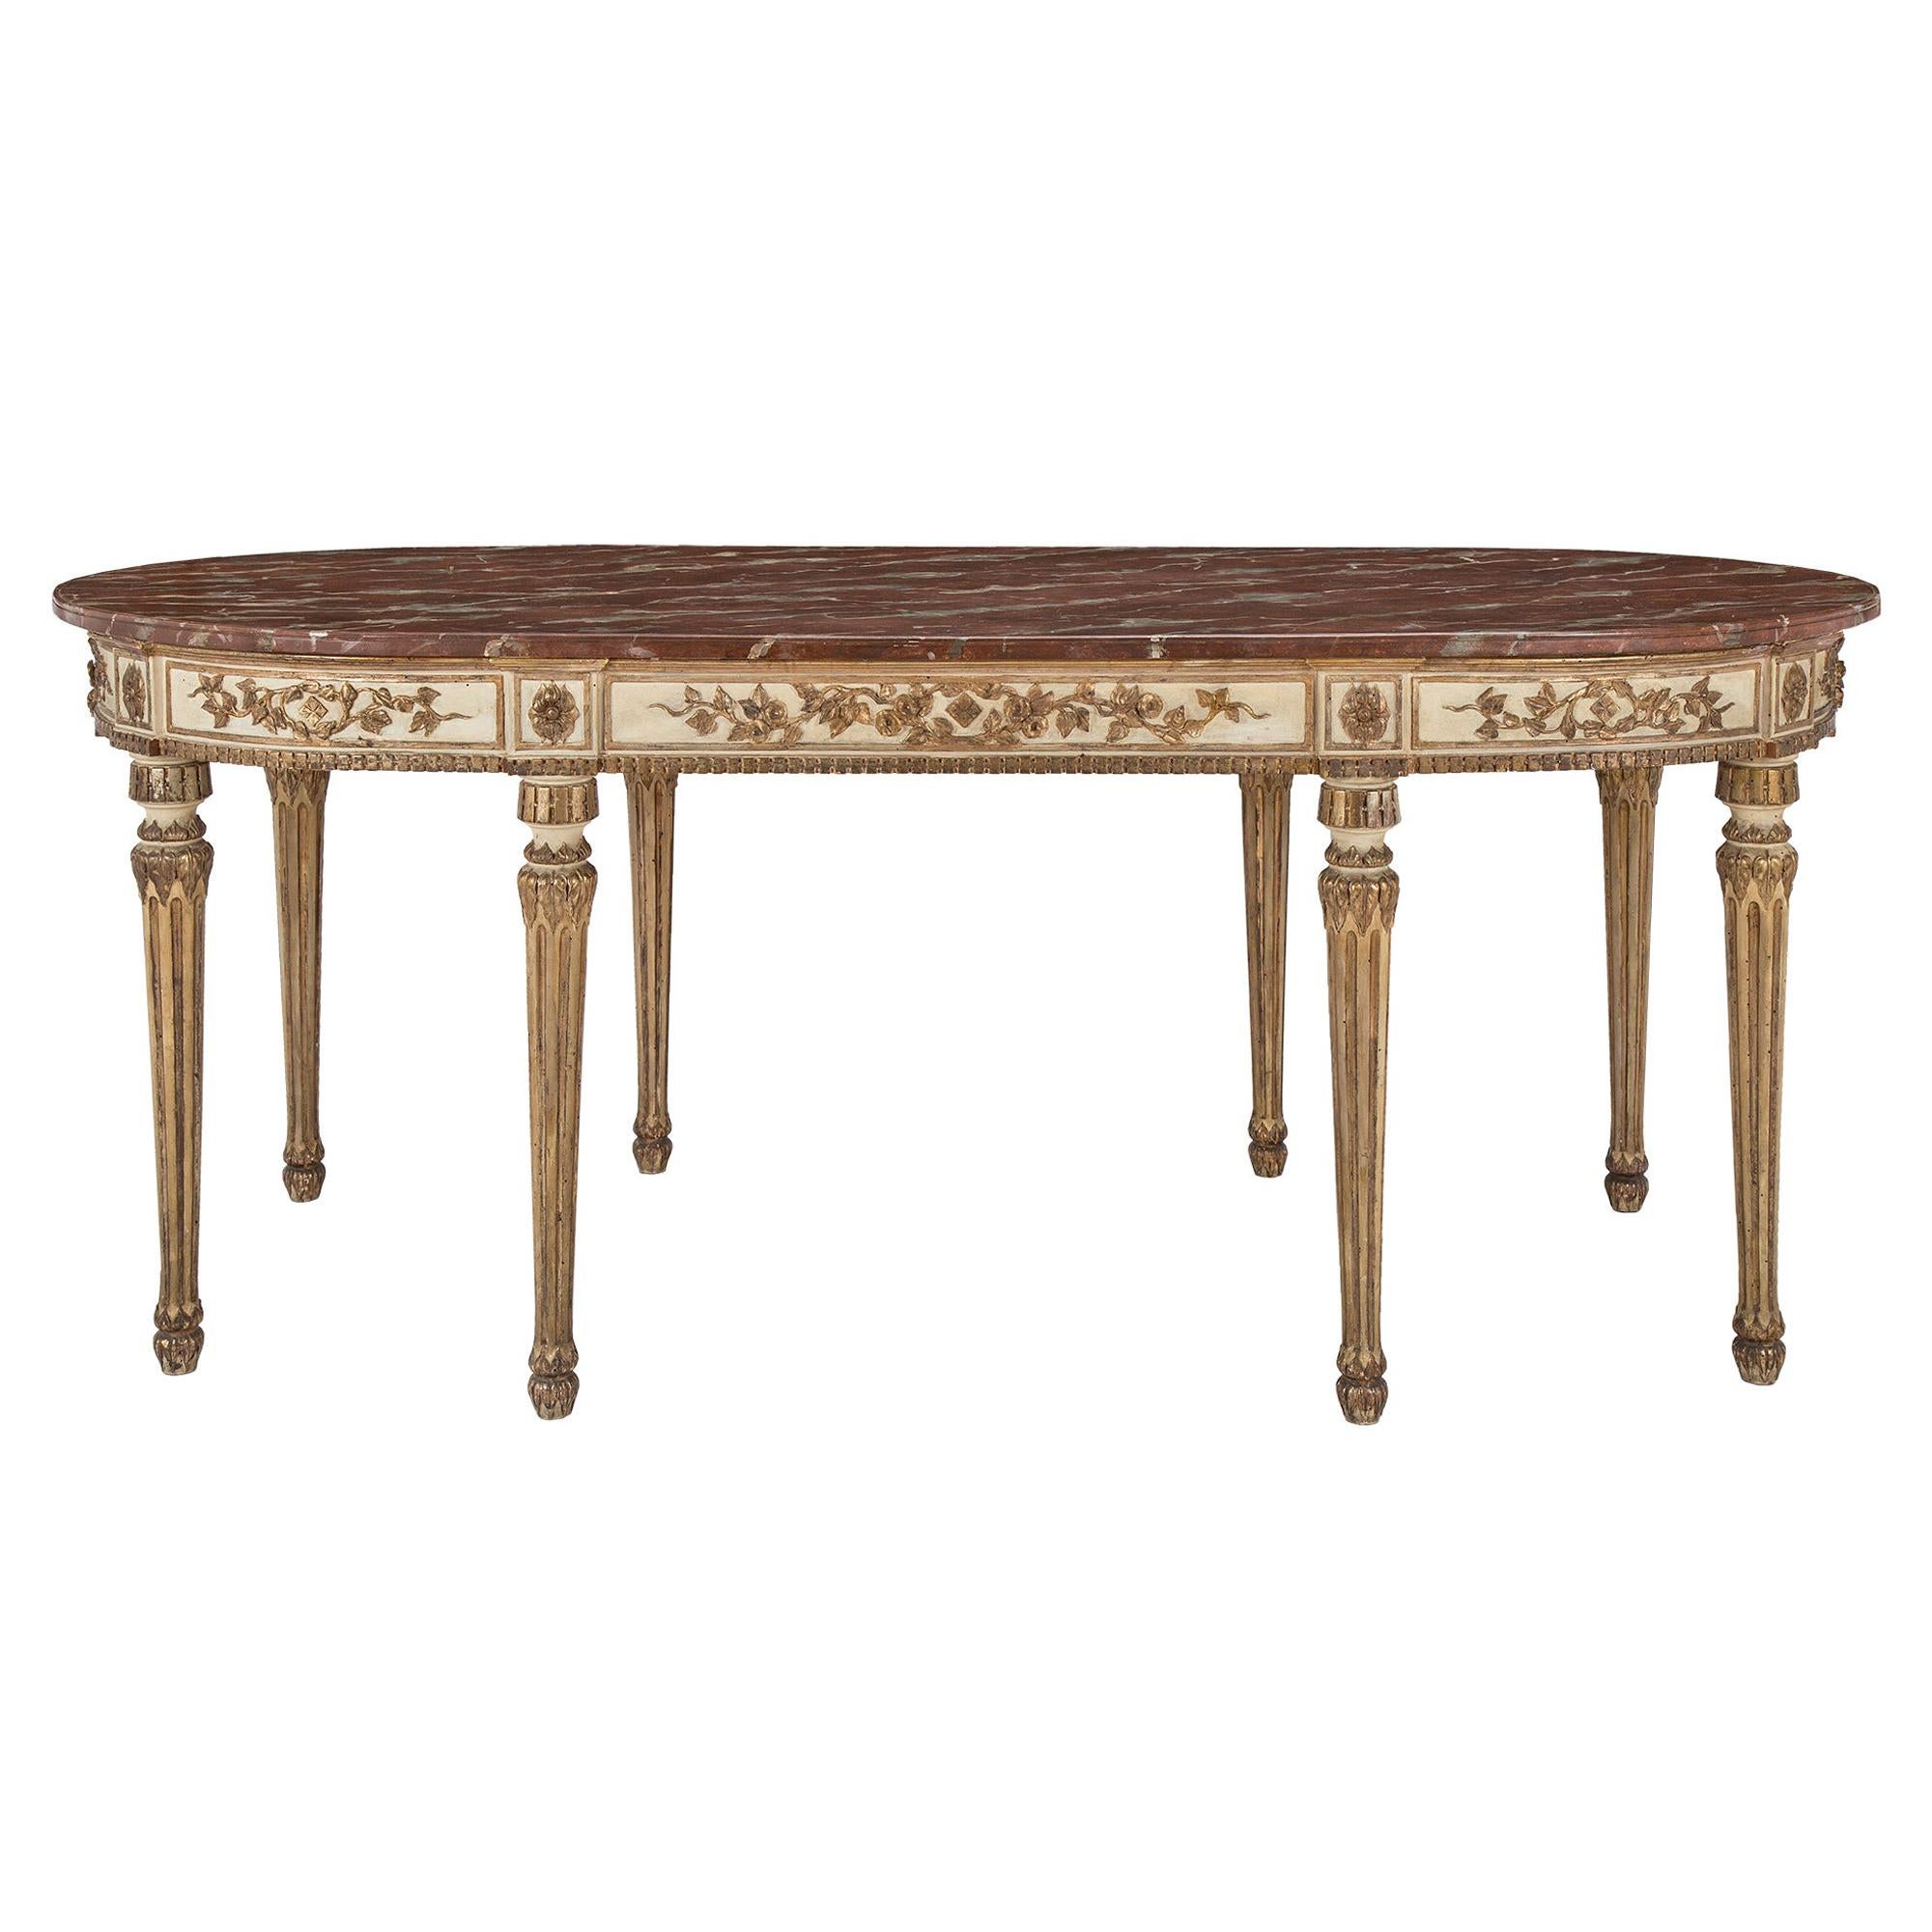 Italian 19th Century Louis XVI Style Eight Leg Oval Center Table from Naples For Sale